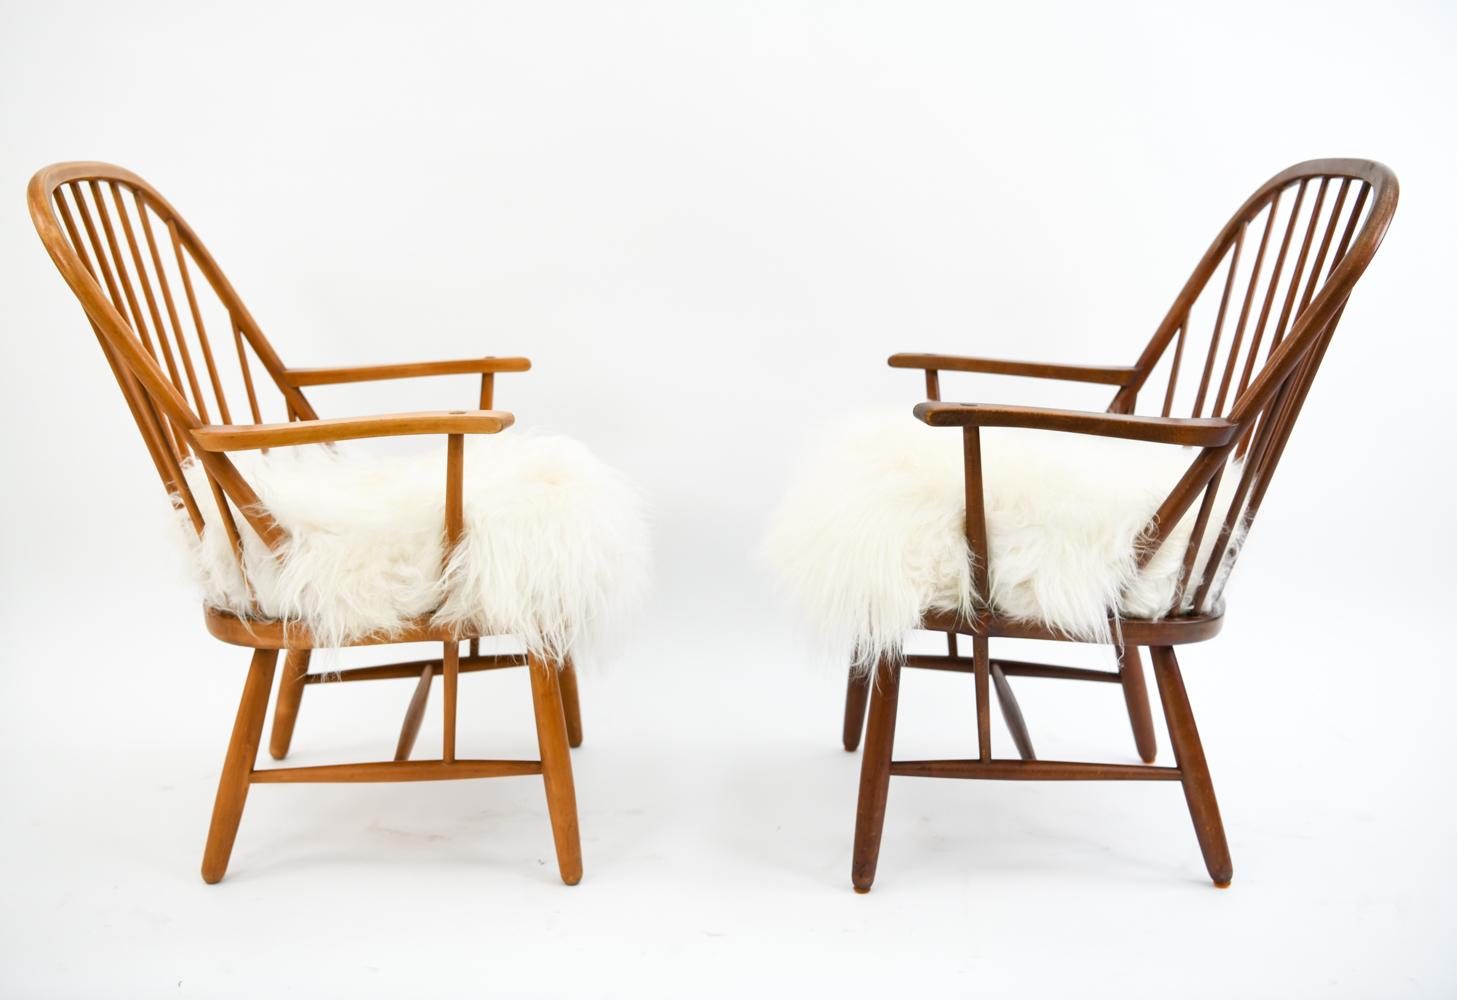 Two unusual and impressive Fritz Hansen armchairs, attributed to Palle Suenson & Gustav Adolf Schneck. These chairs feature spindle backs with fluffy lambswool seats for a wonderfully comfortable contrast. Beautiful and sculptural these chairs are